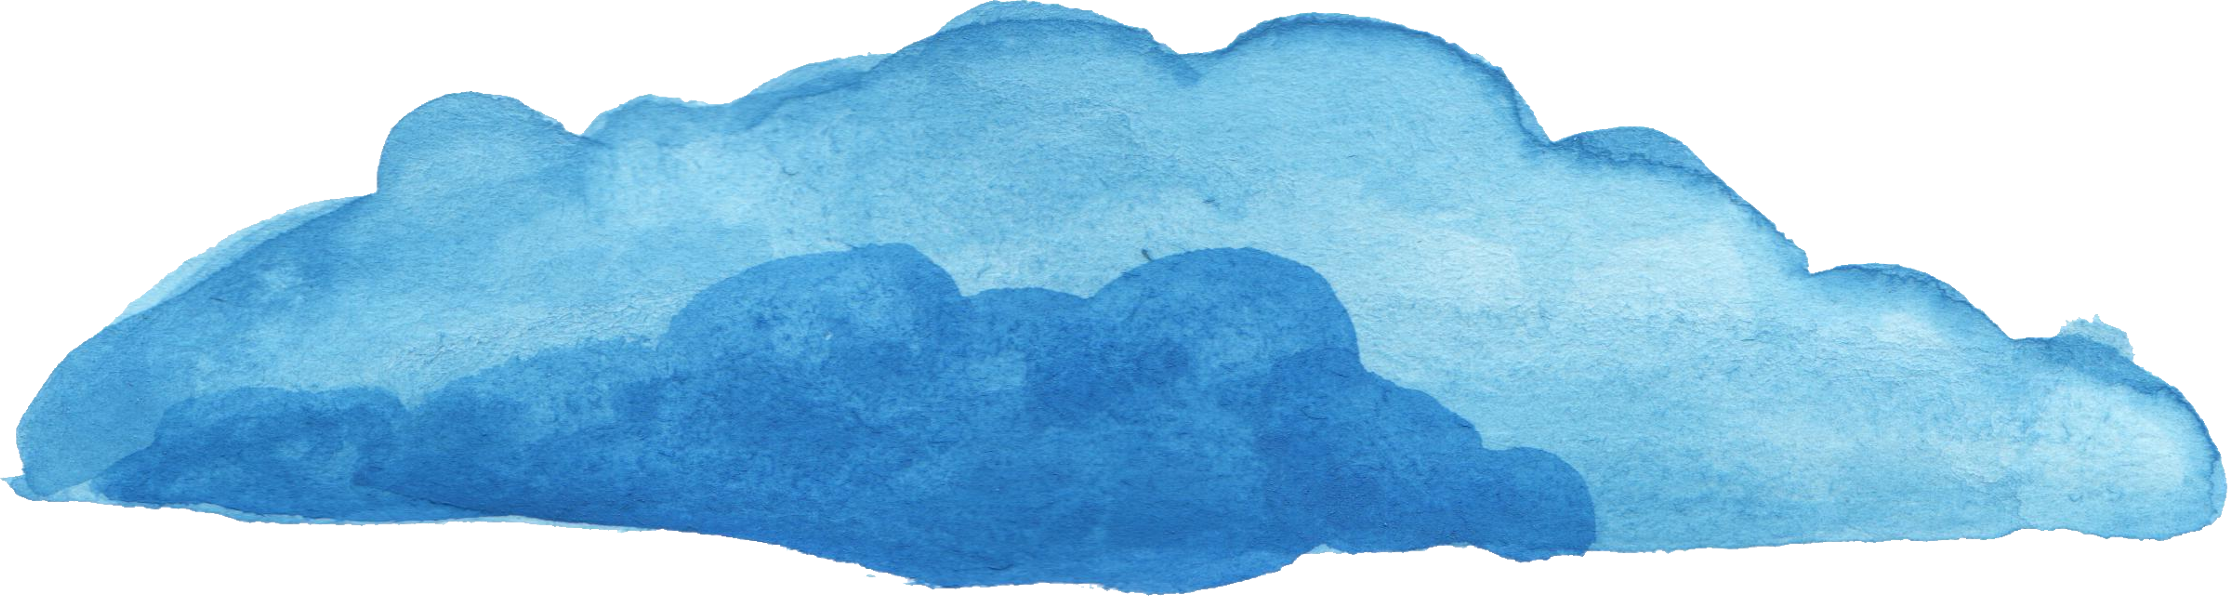 clouds clipart watercolor